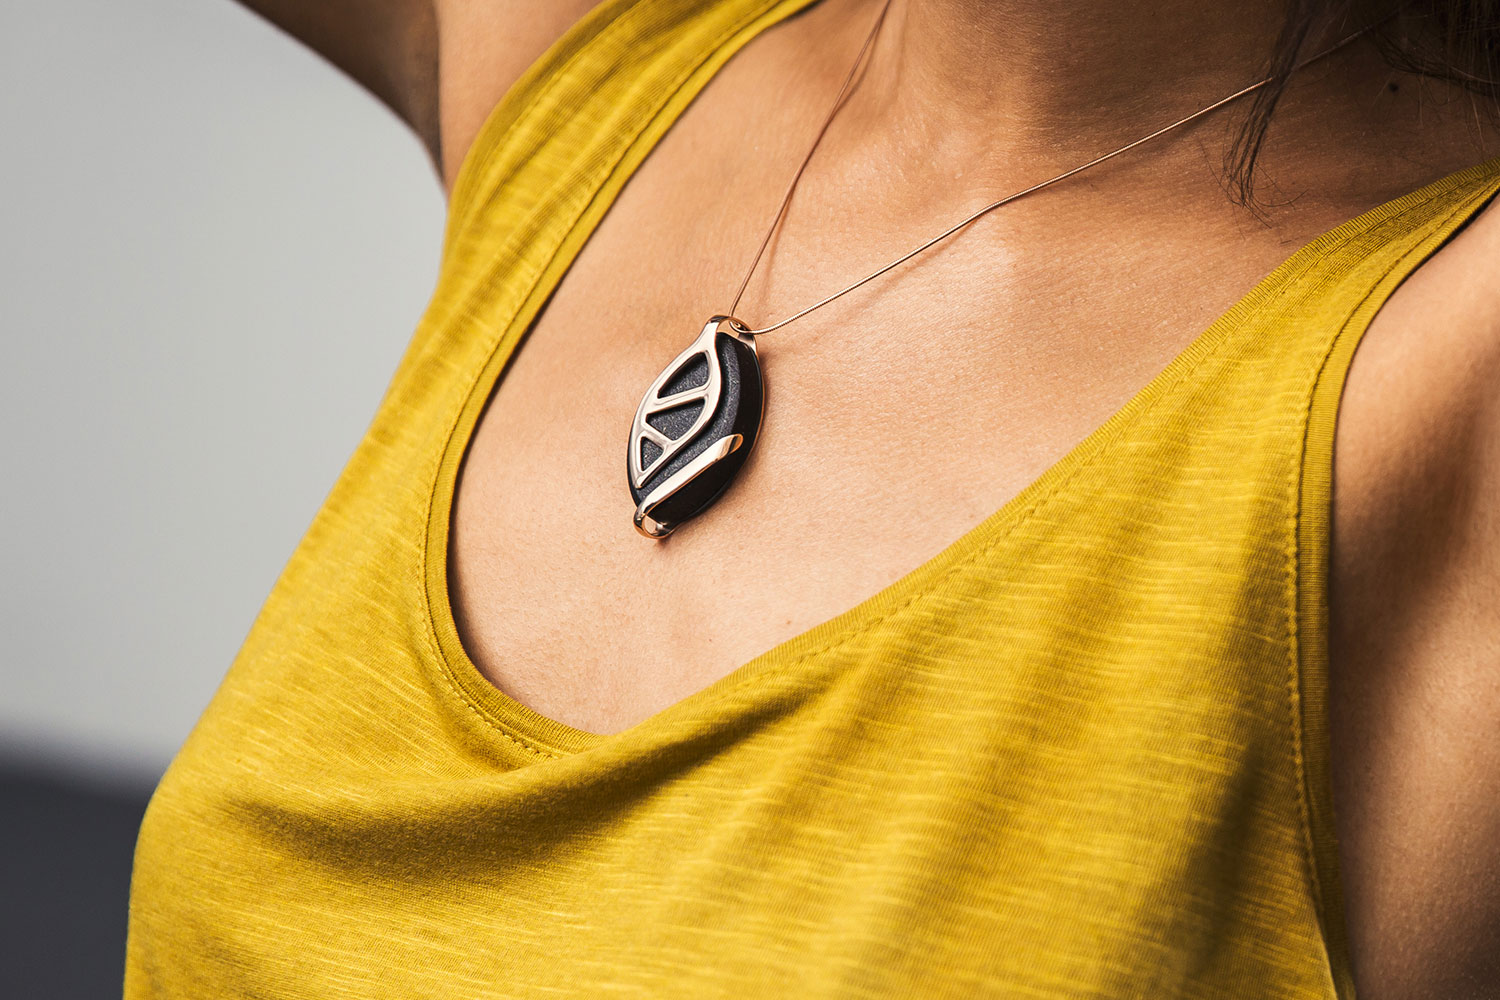 The 5 Best Pieces of Smart Jewelry You Can Buy